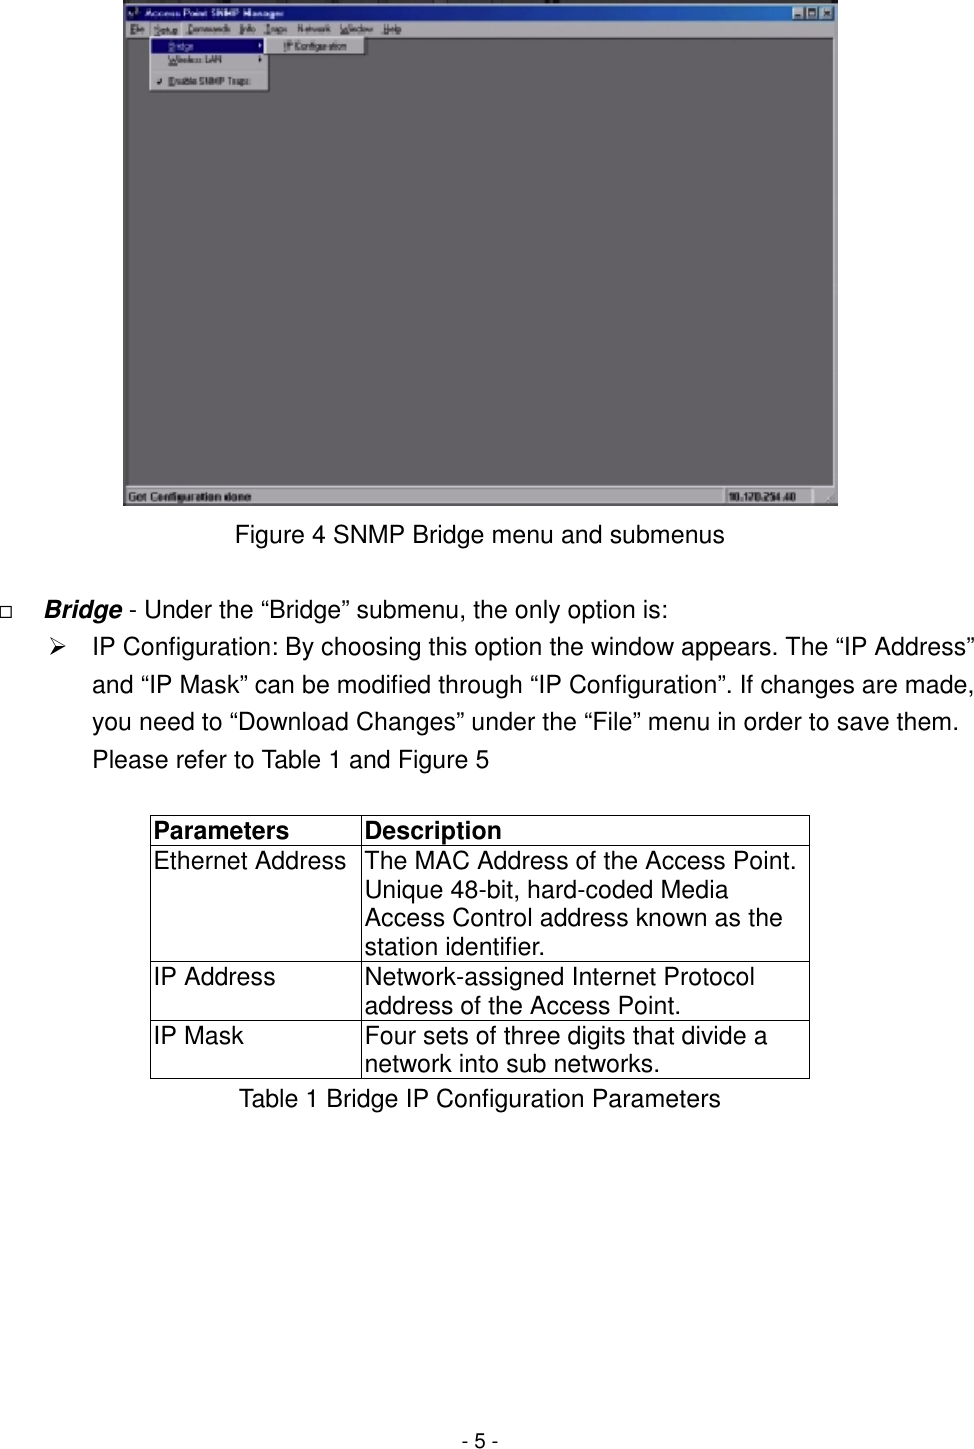 - 5 -Figure 4 SNMP Bridge menu and submenus&quot; Bridge - Under the “Bridge” submenu, the only option is:#  IP Configuration: By choosing this option the window appears. The “IP Address”and “IP Mask” can be modified through “IP Configuration”. If changes are made,you need to “Download Changes” under the “File” menu in order to save them.Please refer to Table 1 and Figure 5Parameters DescriptionEthernet Address The MAC Address of the Access Point.Unique 48-bit, hard-coded MediaAccess Control address known as thestation identifier.IP Address Network-assigned Internet Protocoladdress of the Access Point.IP Mask Four sets of three digits that divide anetwork into sub networks.Table 1 Bridge IP Configuration Parameters